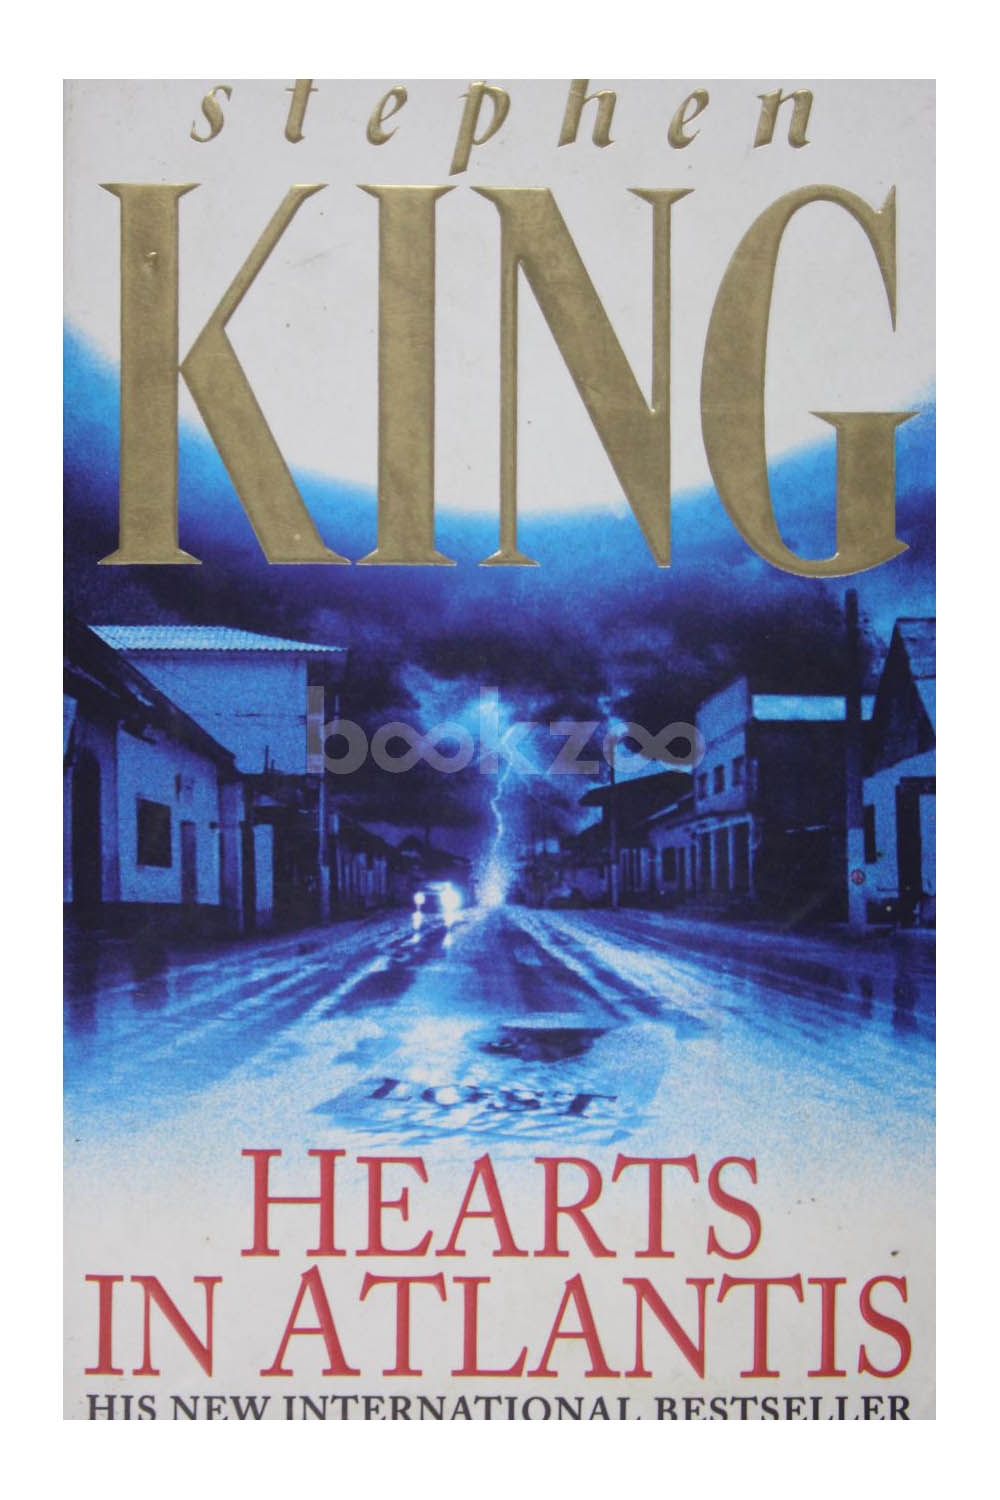 —　Online　bookstore　King　by　In　Stephen　Atlantis　at　Buy　Hearts